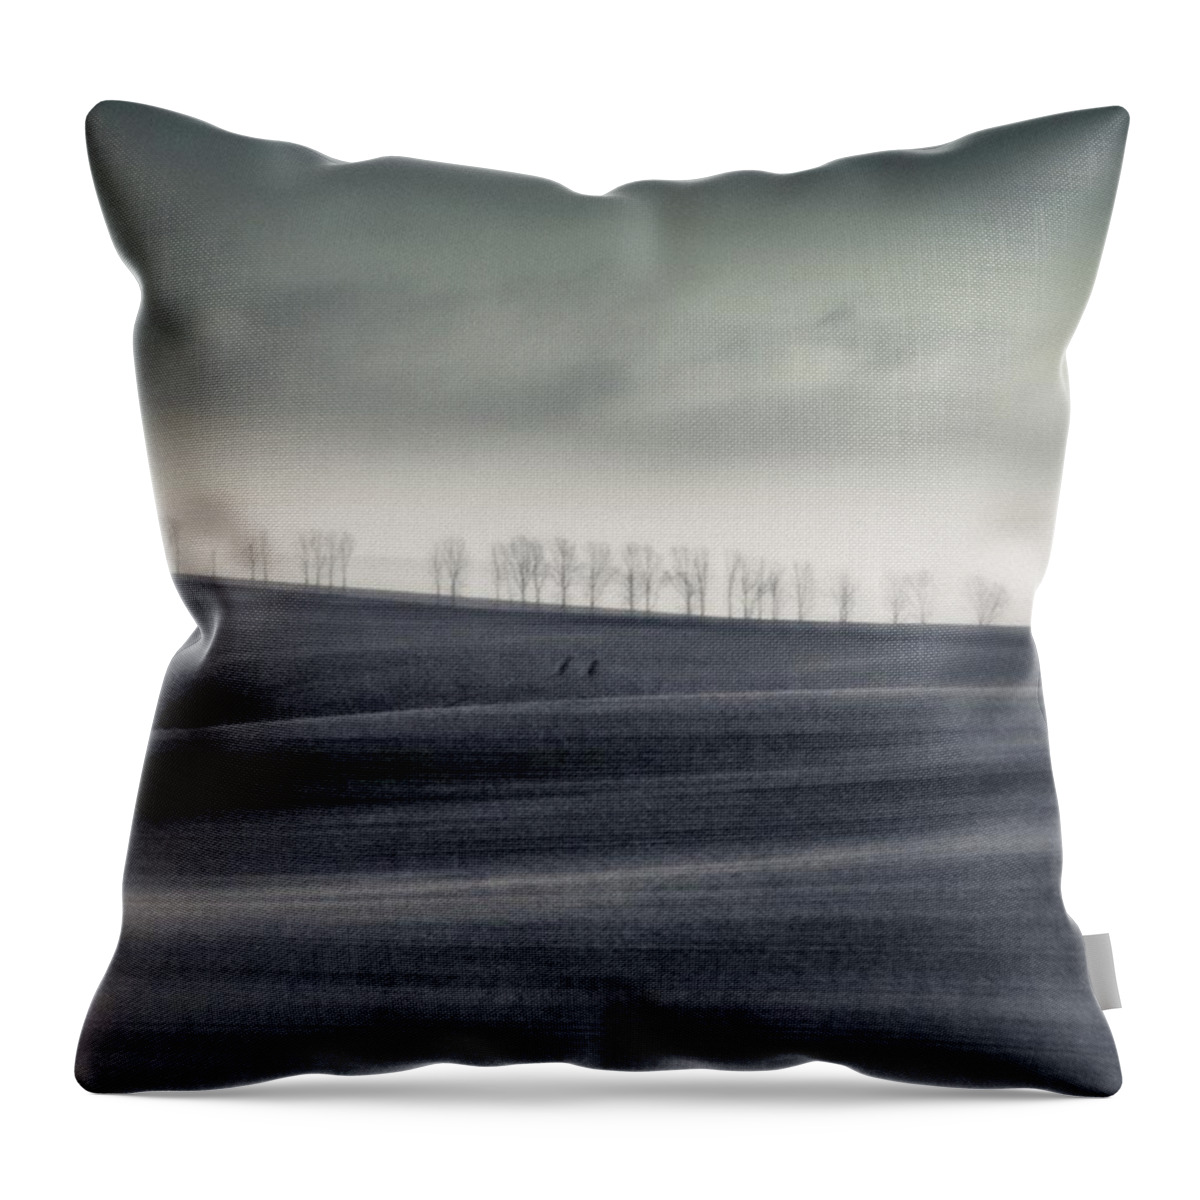 Clouds Throw Pillow featuring the photograph The Trees On The Horizon

#monochrome by Mandy Tabatt